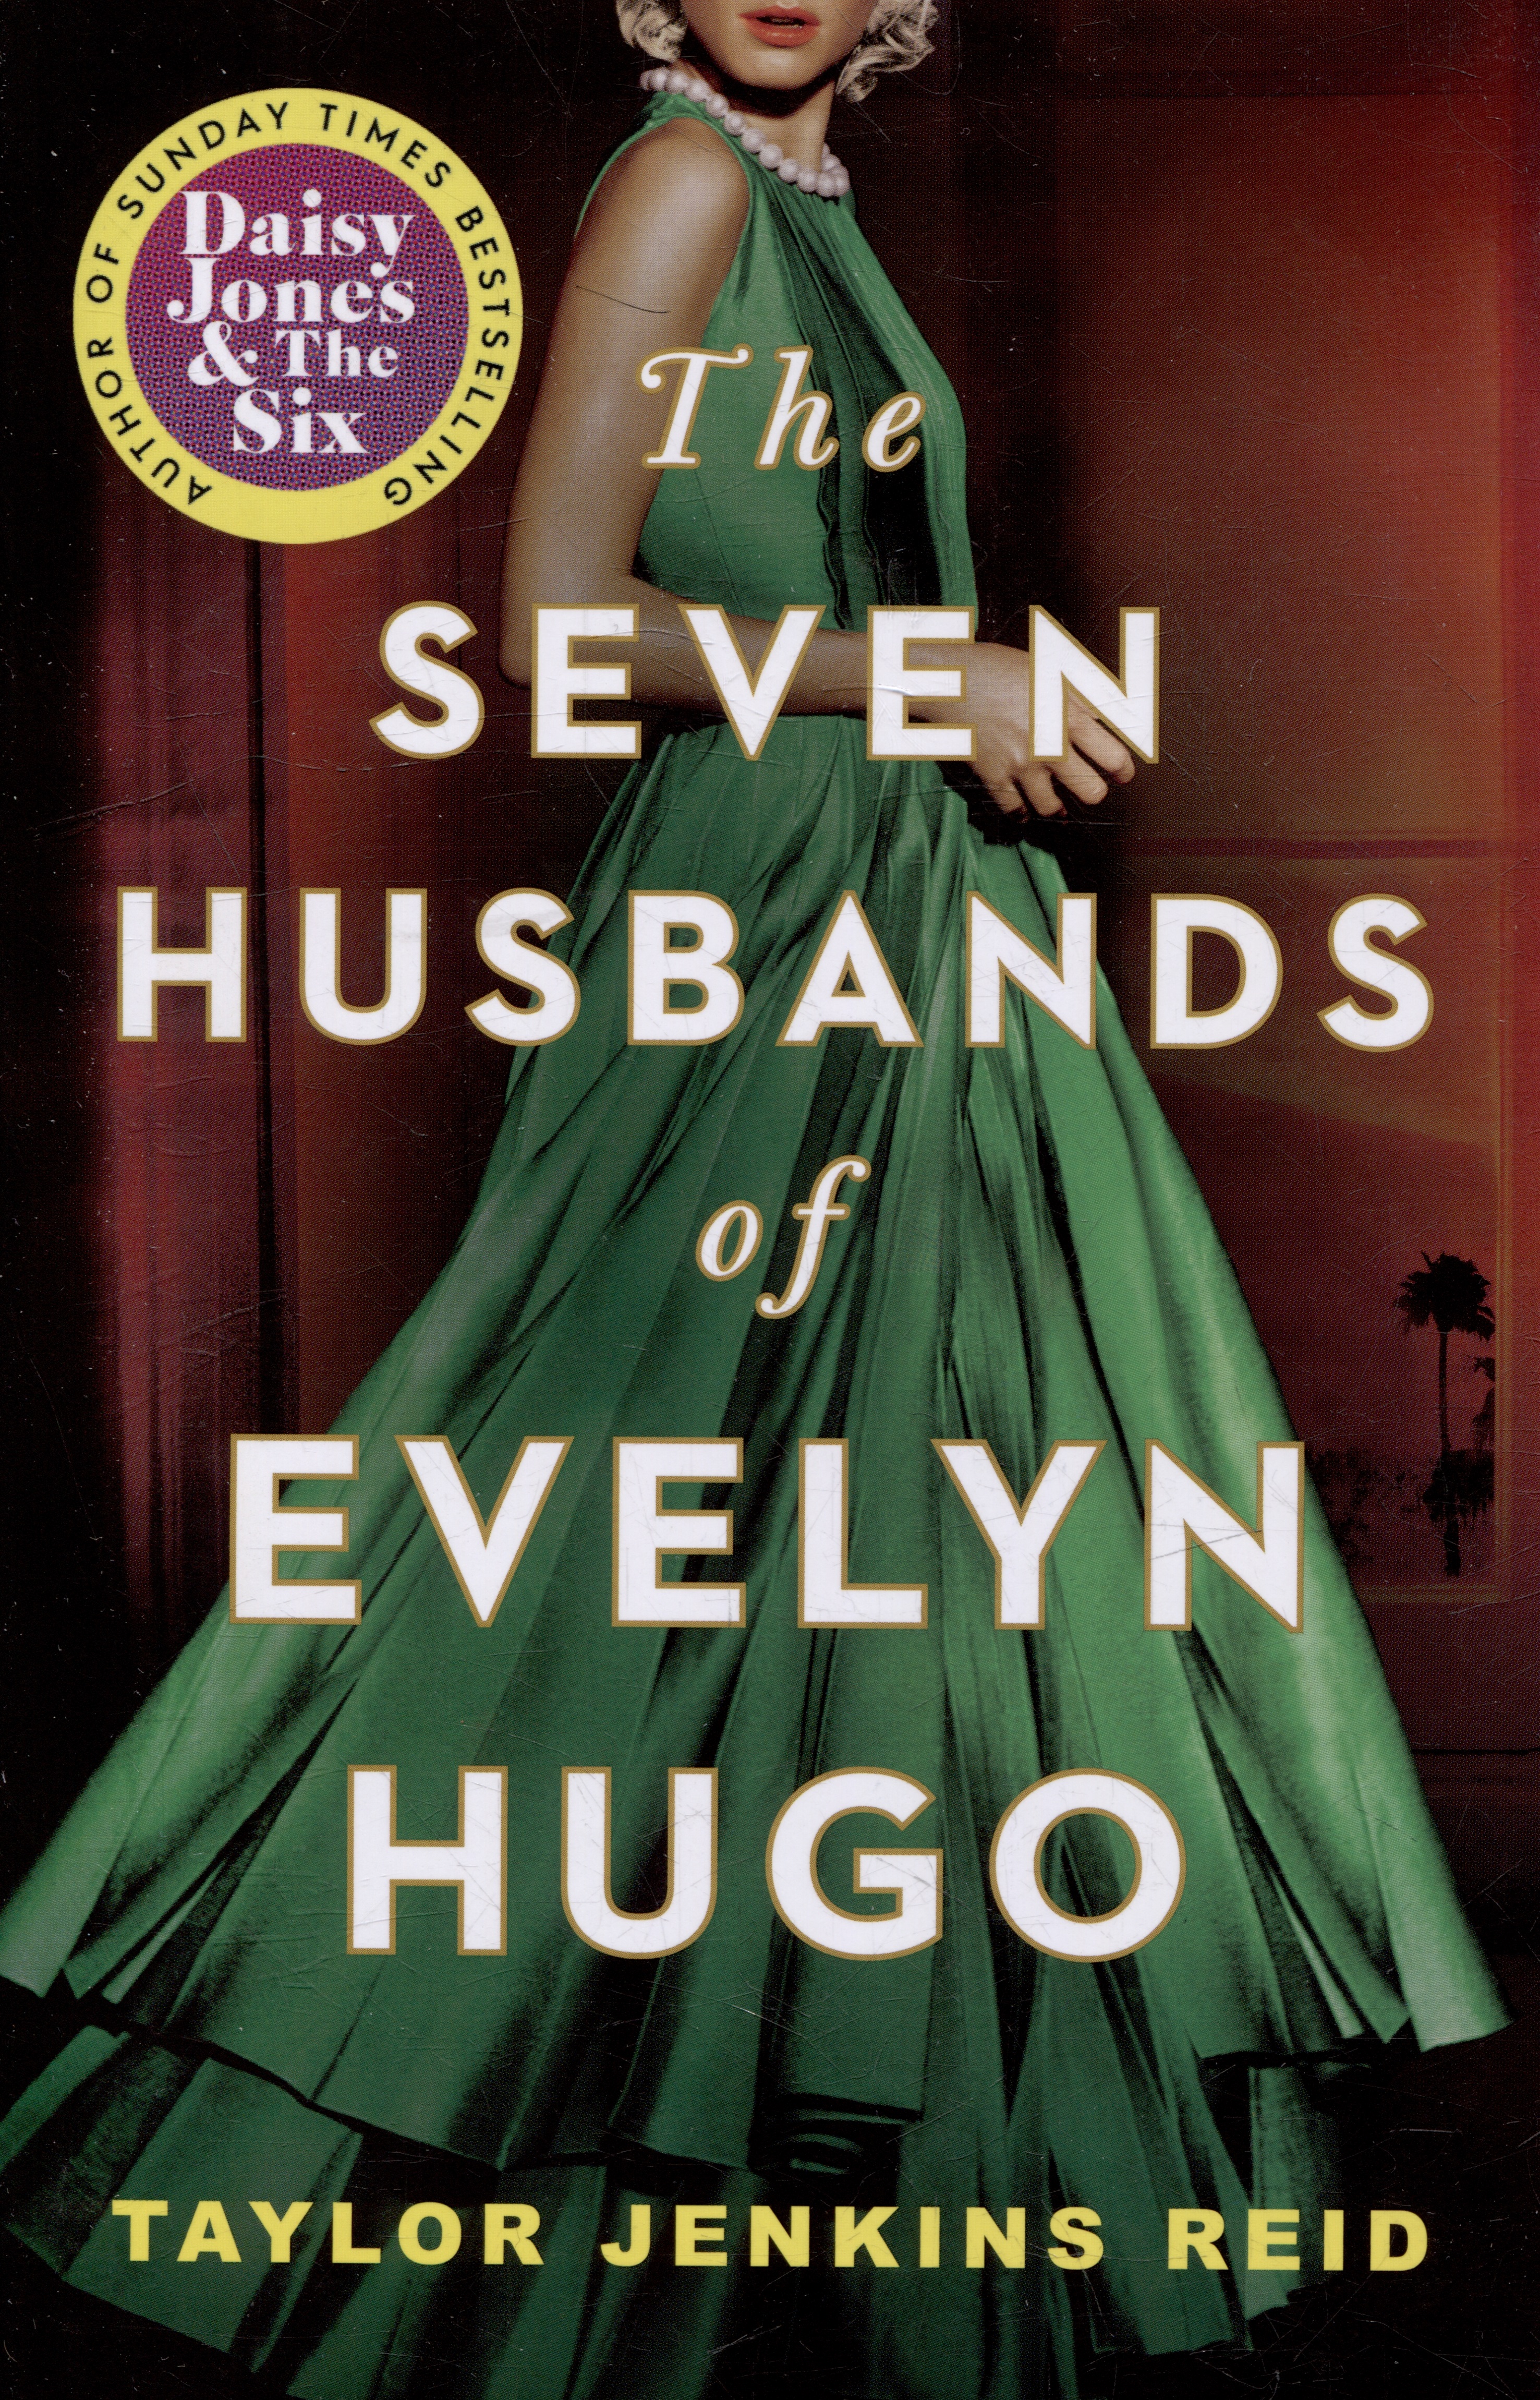 roffey monique the mermaid of black conch The Seven Husbands of Evelyn Hugo: A Novel